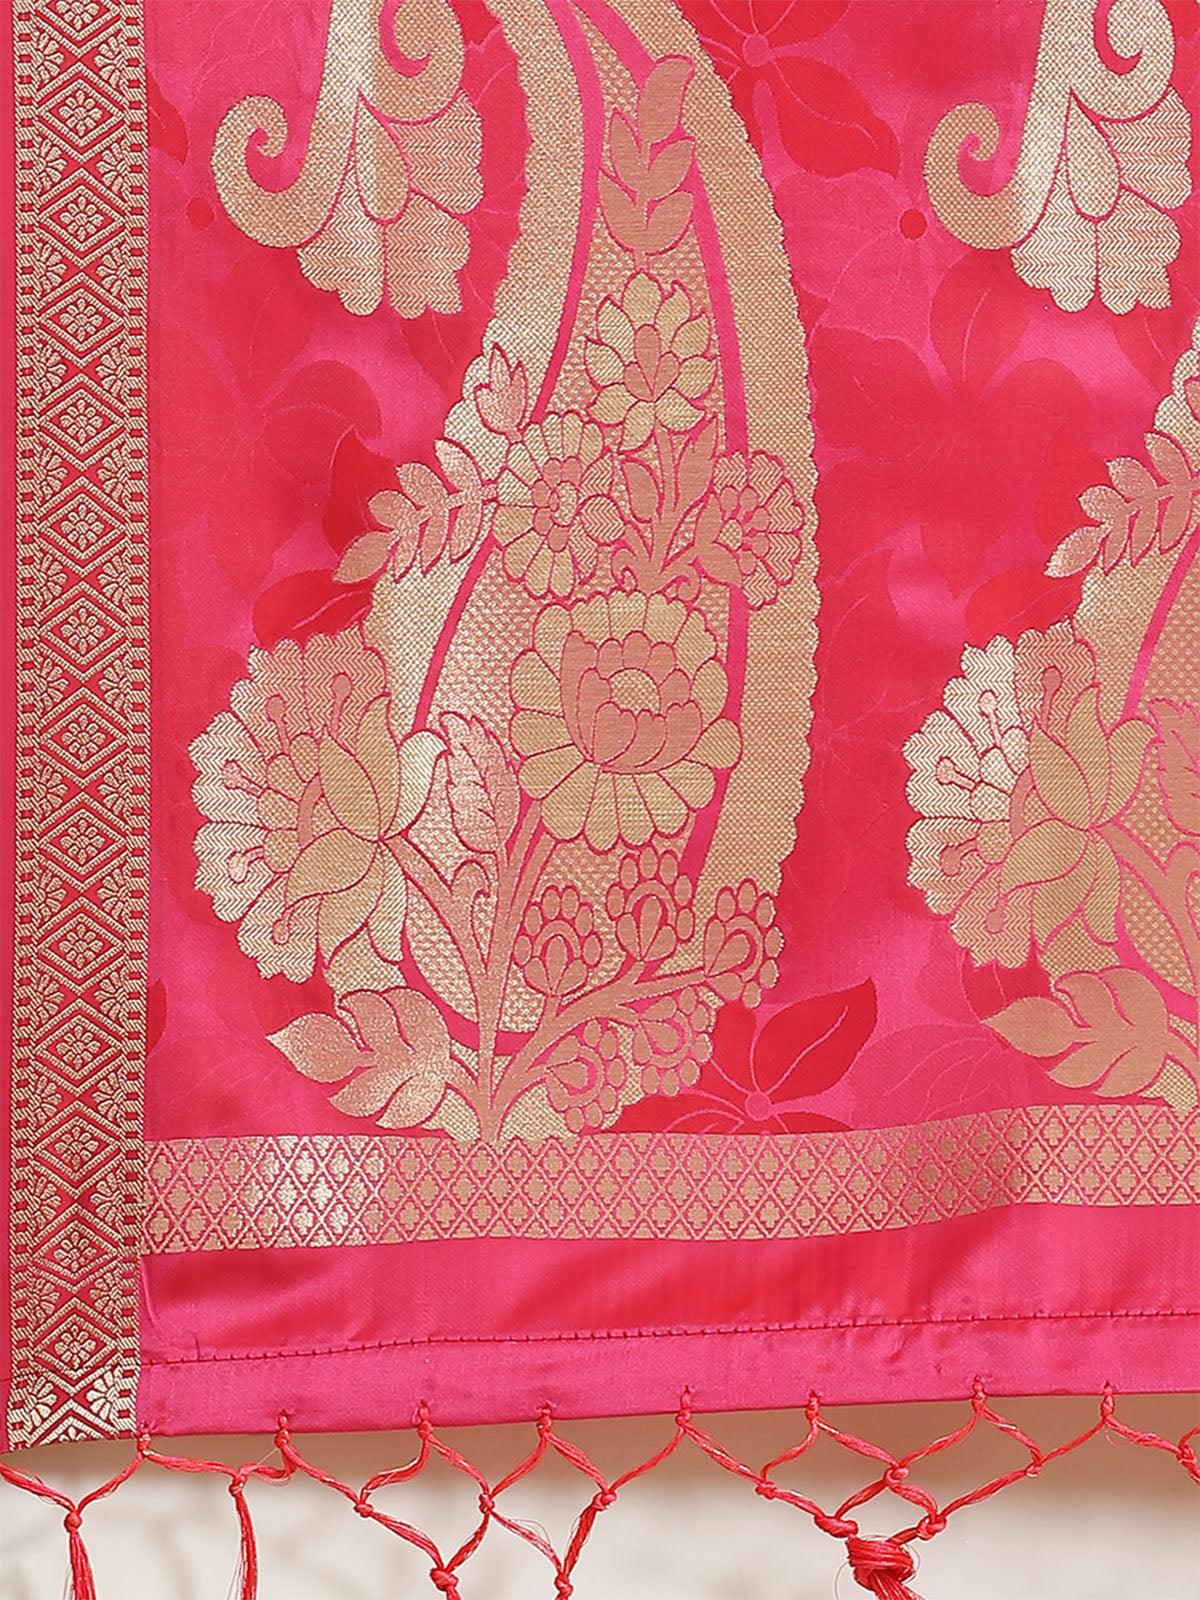 Pink Festive Pure Satin Woven Saree With Unstitched Blouse - Odette